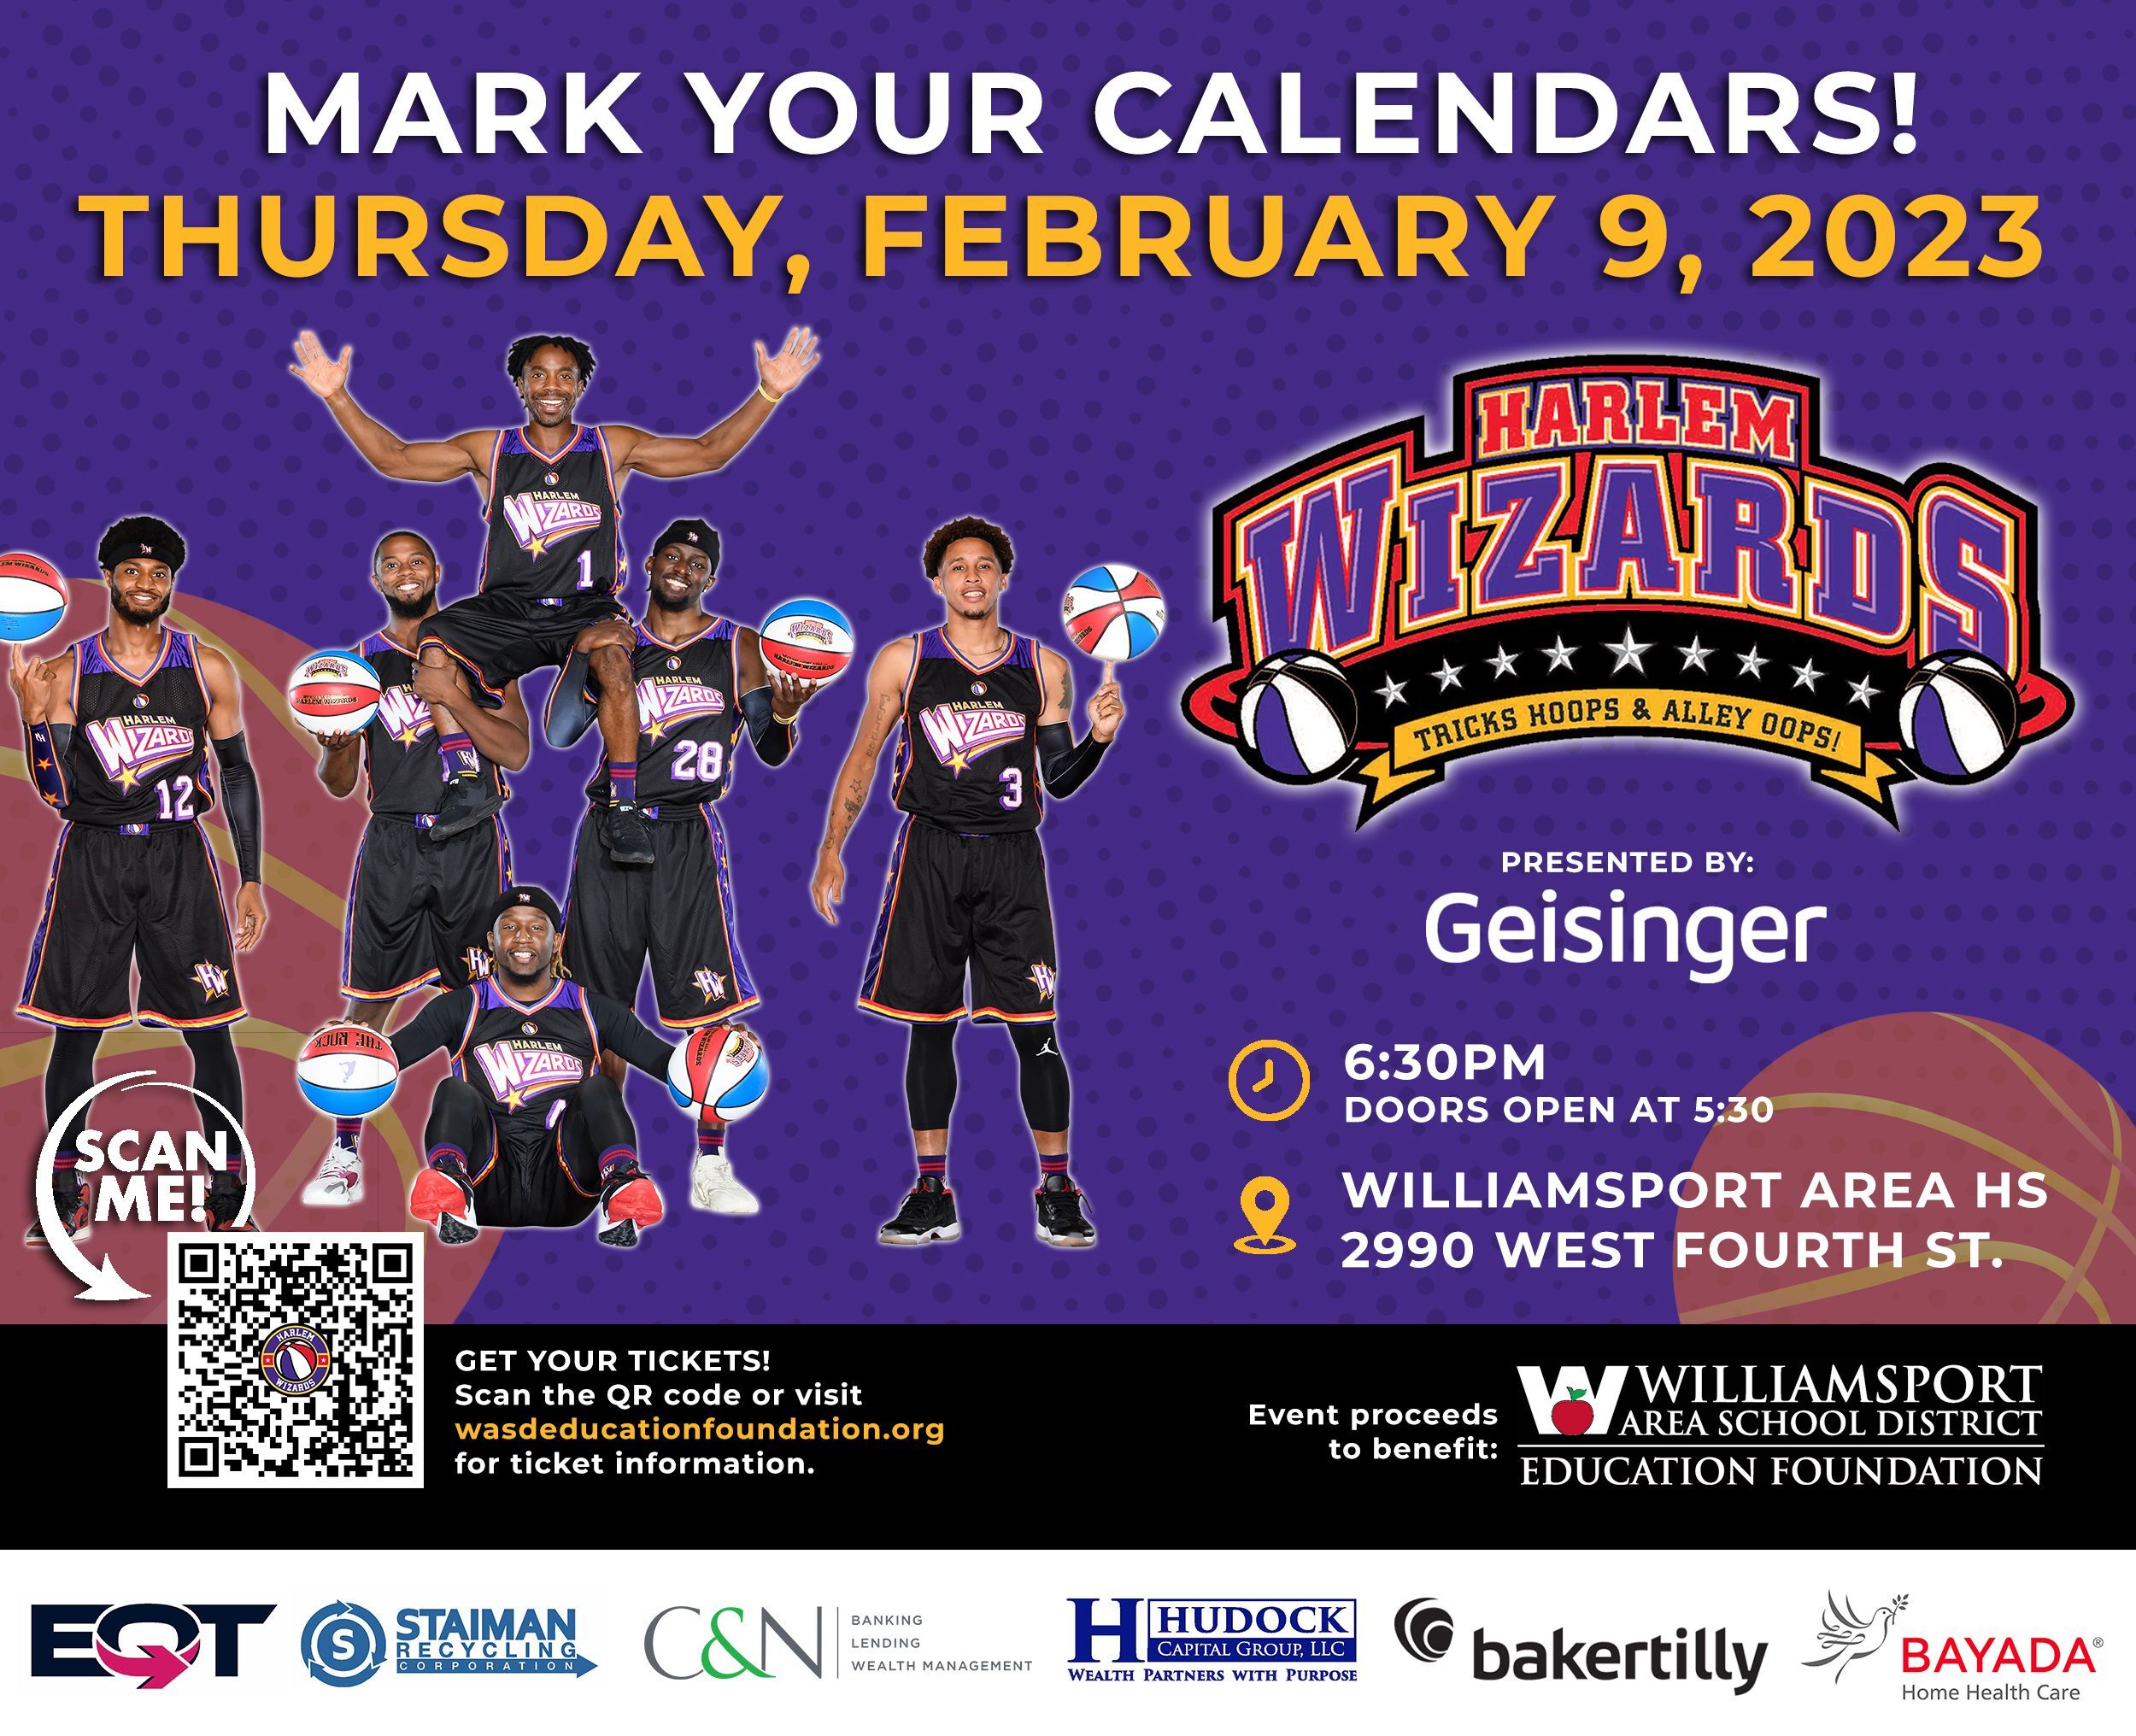 Harlem Wizards to Return to 'The Magic Dome' on Feb. 9; Tickets Now on Sale